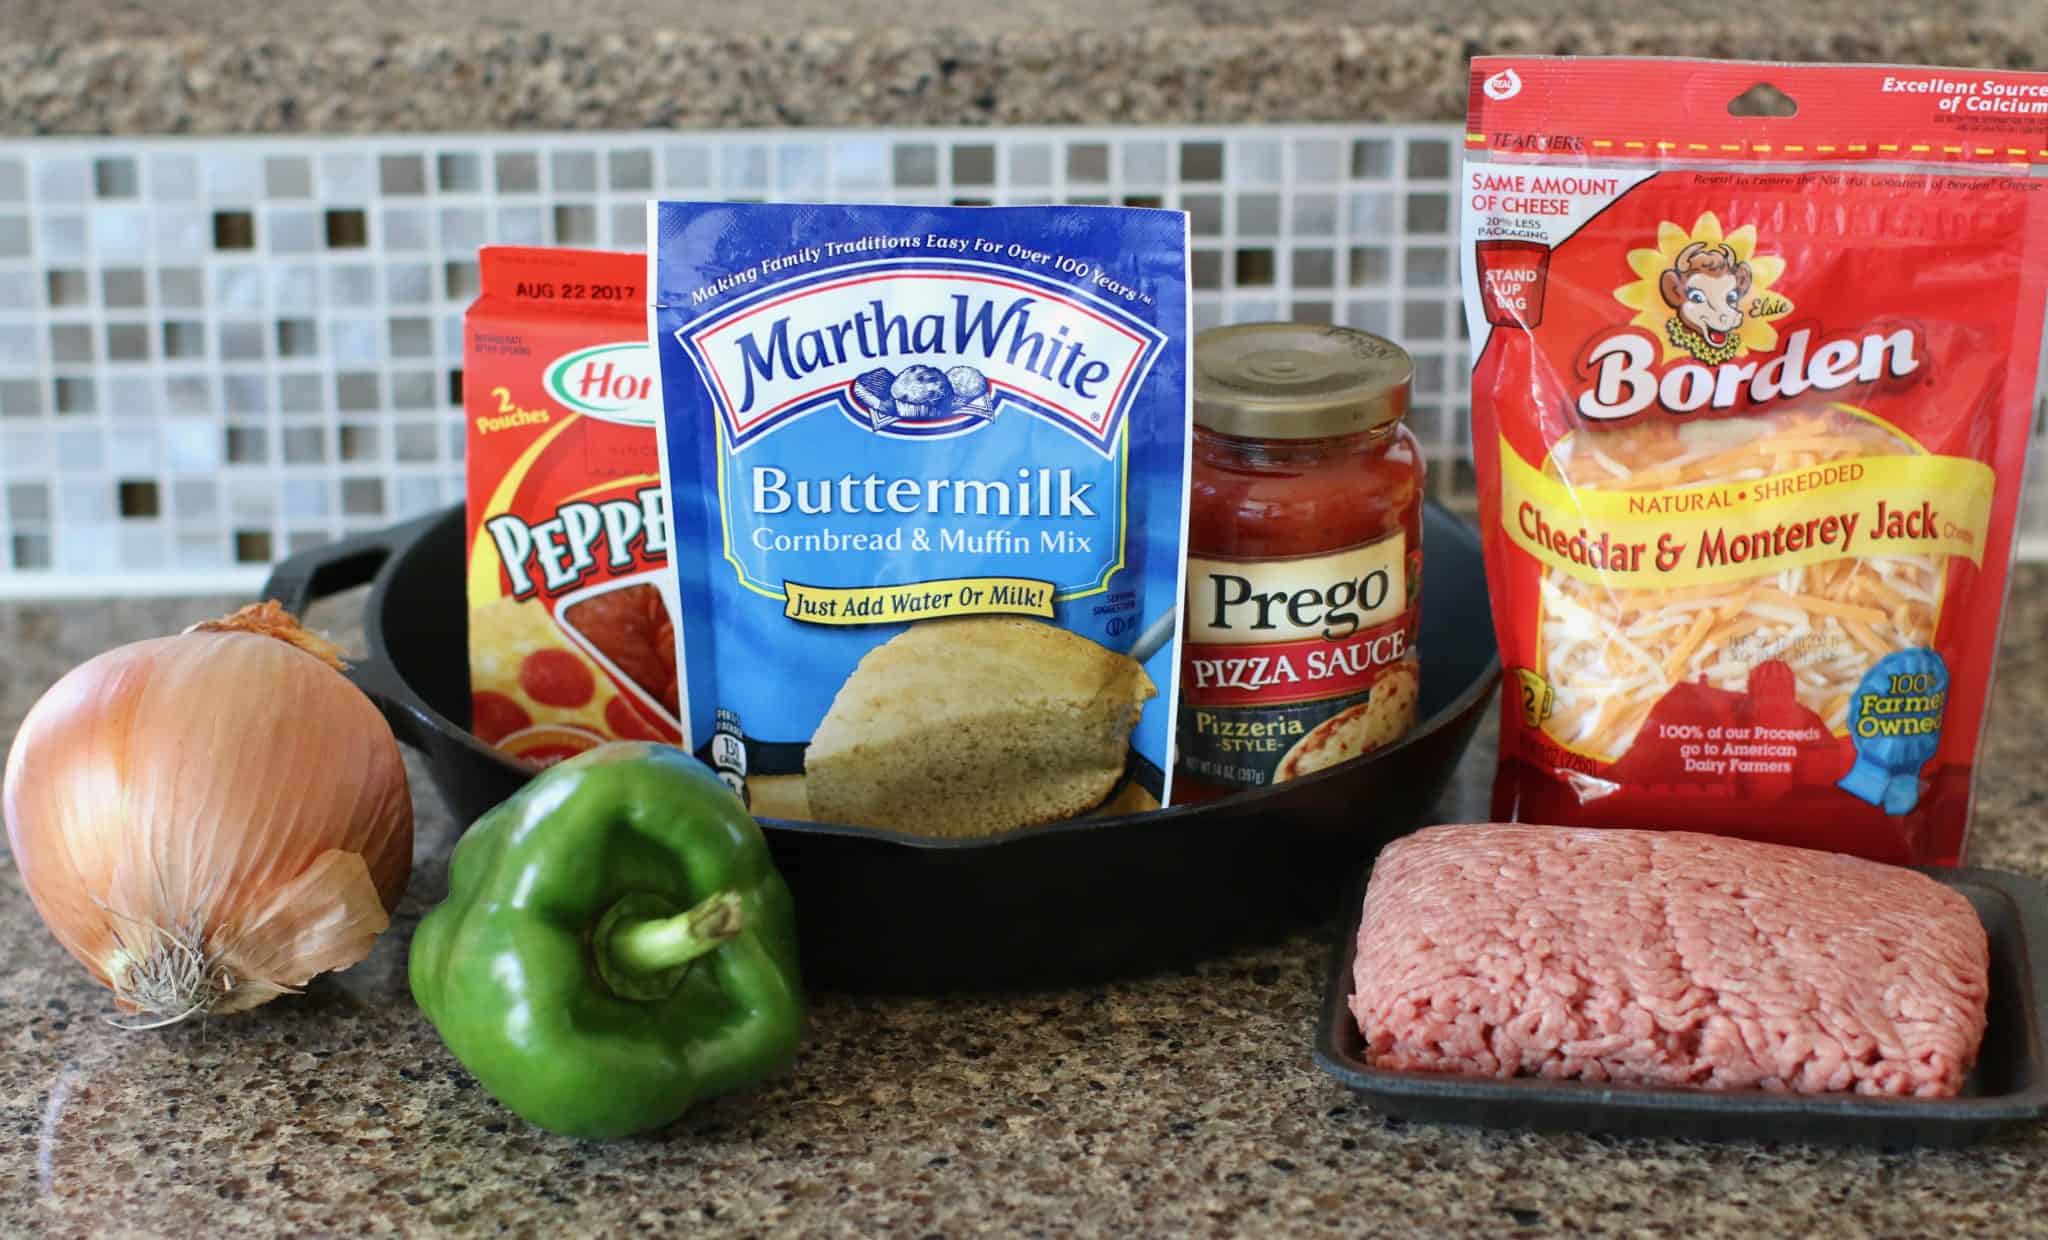 buttermilk cornbread mix, ground beef, pizza sauce, pepperoni slices, onion, green pepper, shredded cheese.